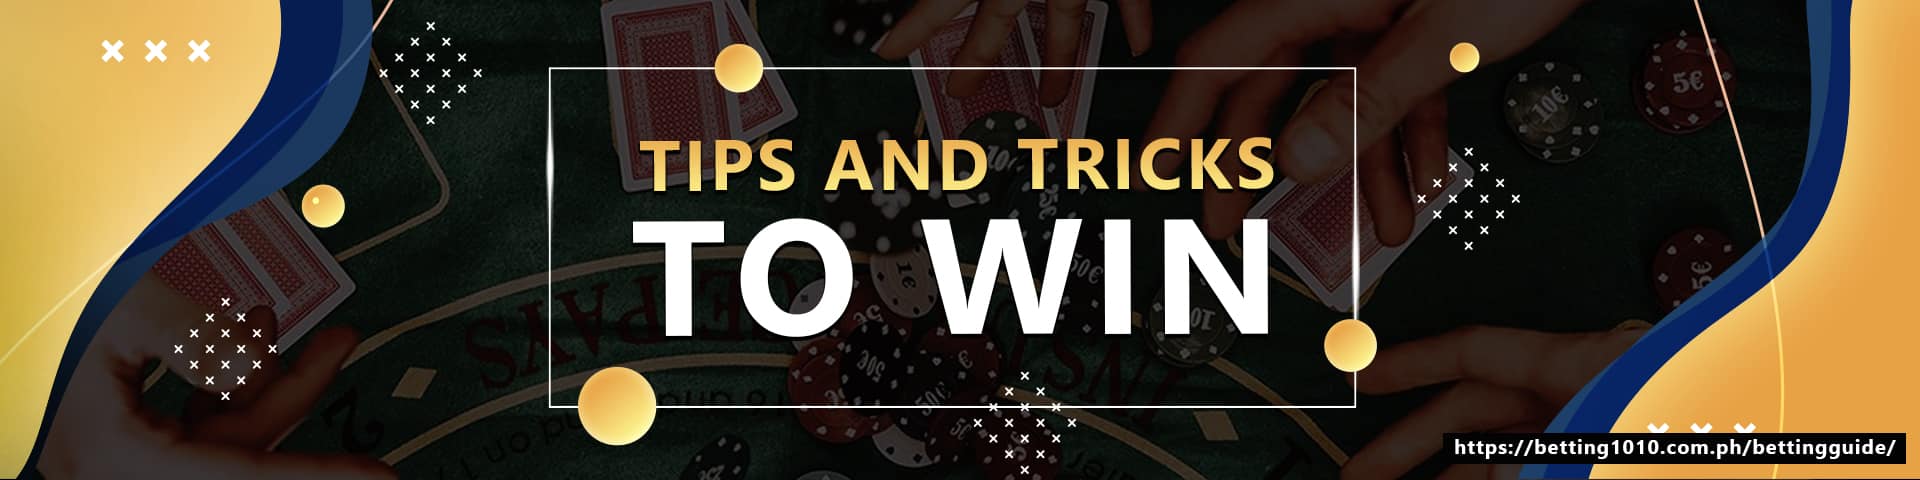 Tips And Tricks To Win